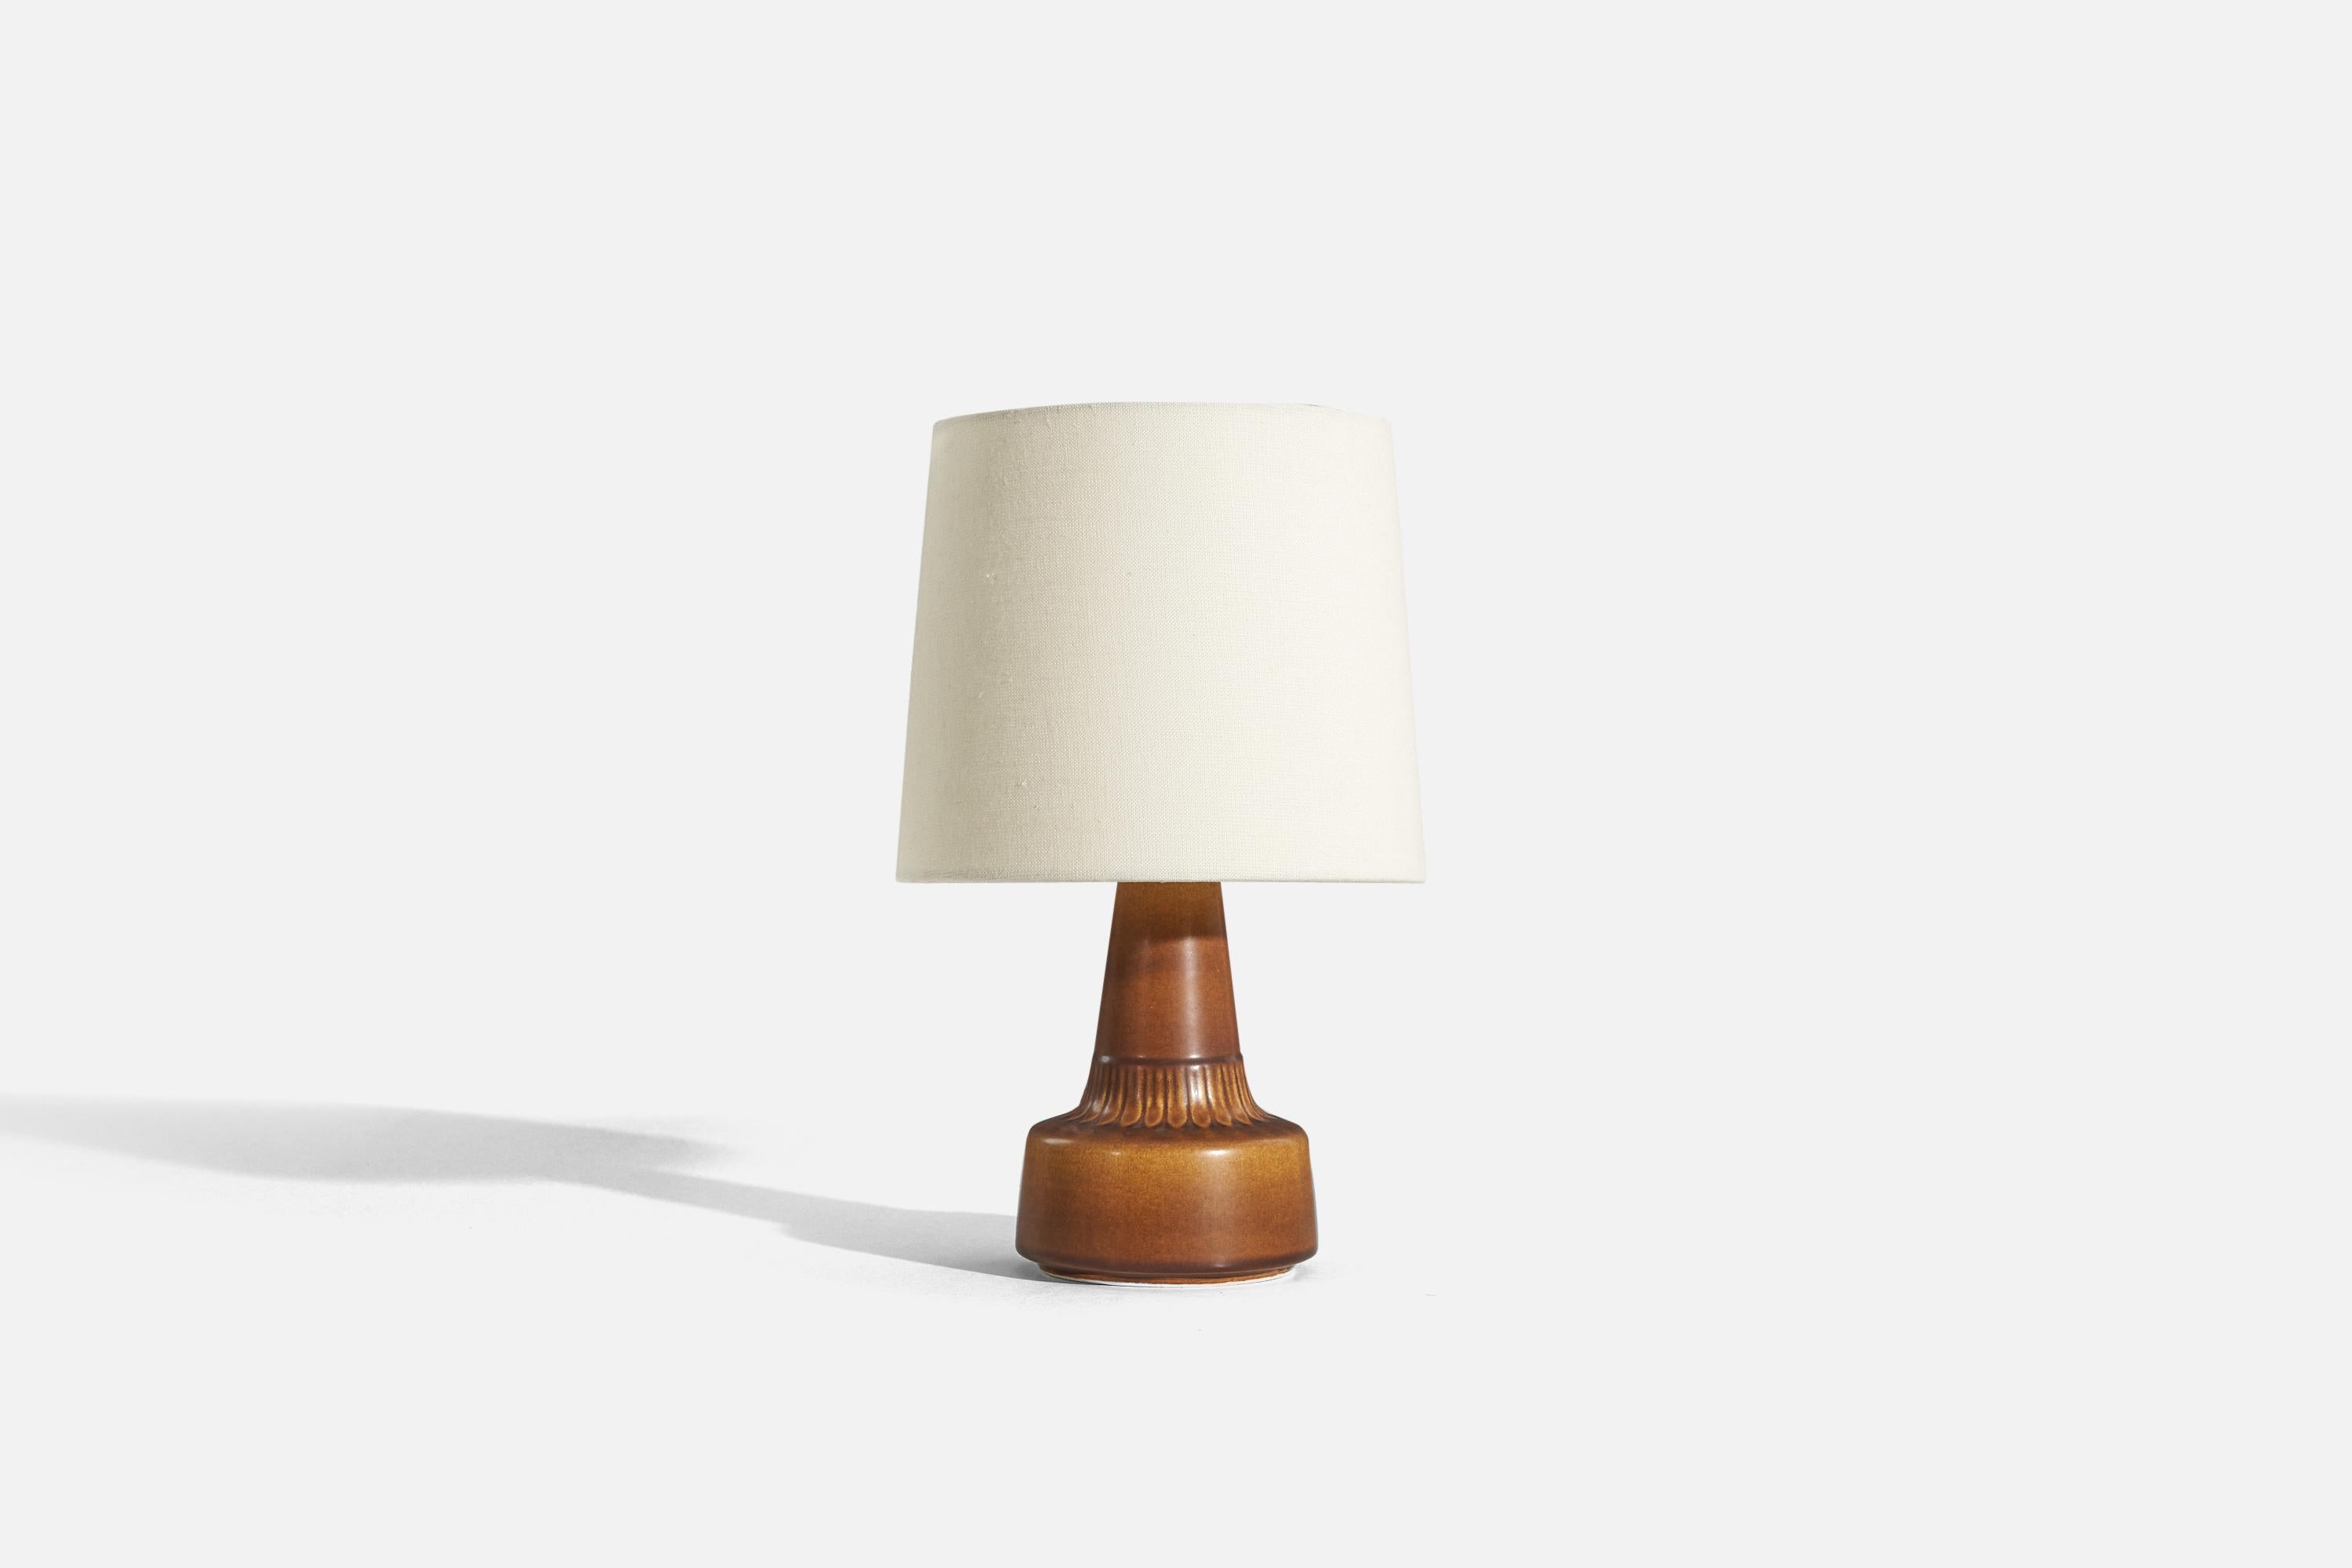 A brown, glazed stoneware table lamp designed and produced by Søholm Stentøj, Bornholm, Denmark, 1960s.

Sold without lampshade. 
Dimensions of Lamp (inches) : 8.8125 x 4.75 x 4.75 (H x W x D)
Dimensions of Shade (inches) : 7 x 8 x 7 (T x B x